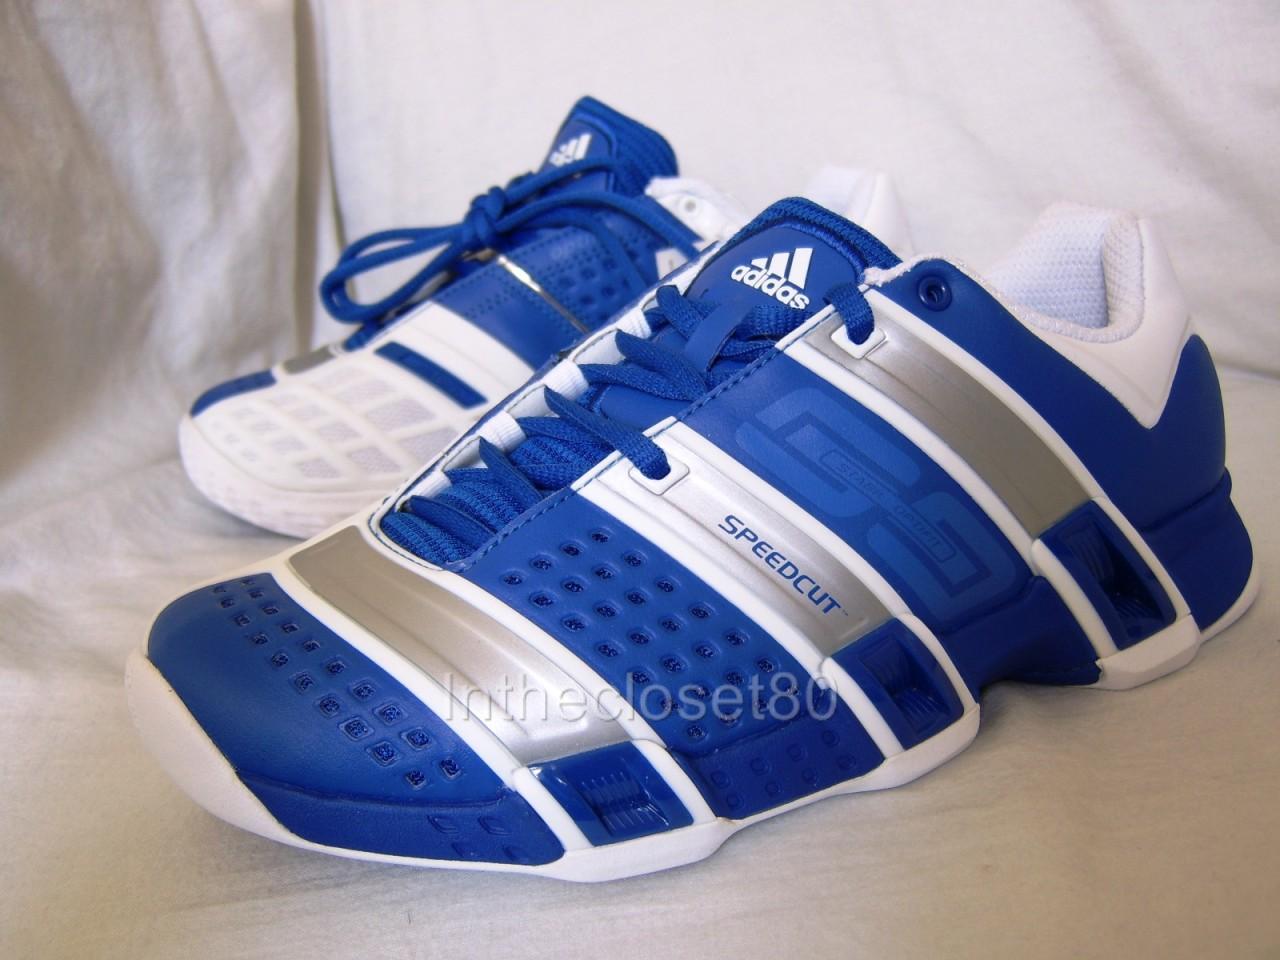 Adidas stabil Boots